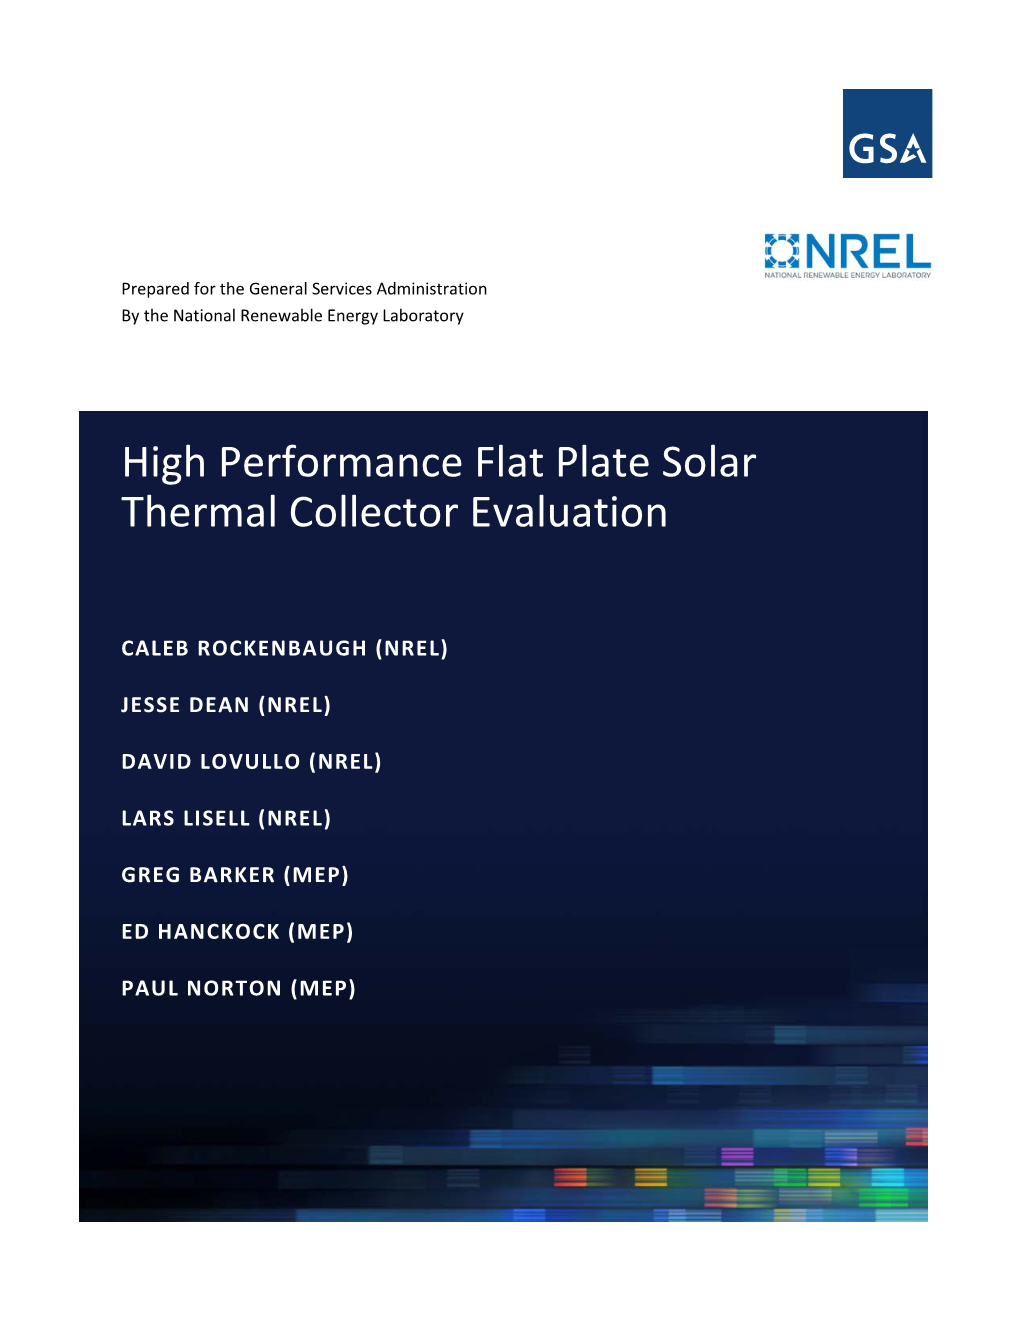 High Performance Flat Plate Solar Thermal Collector Evaluation